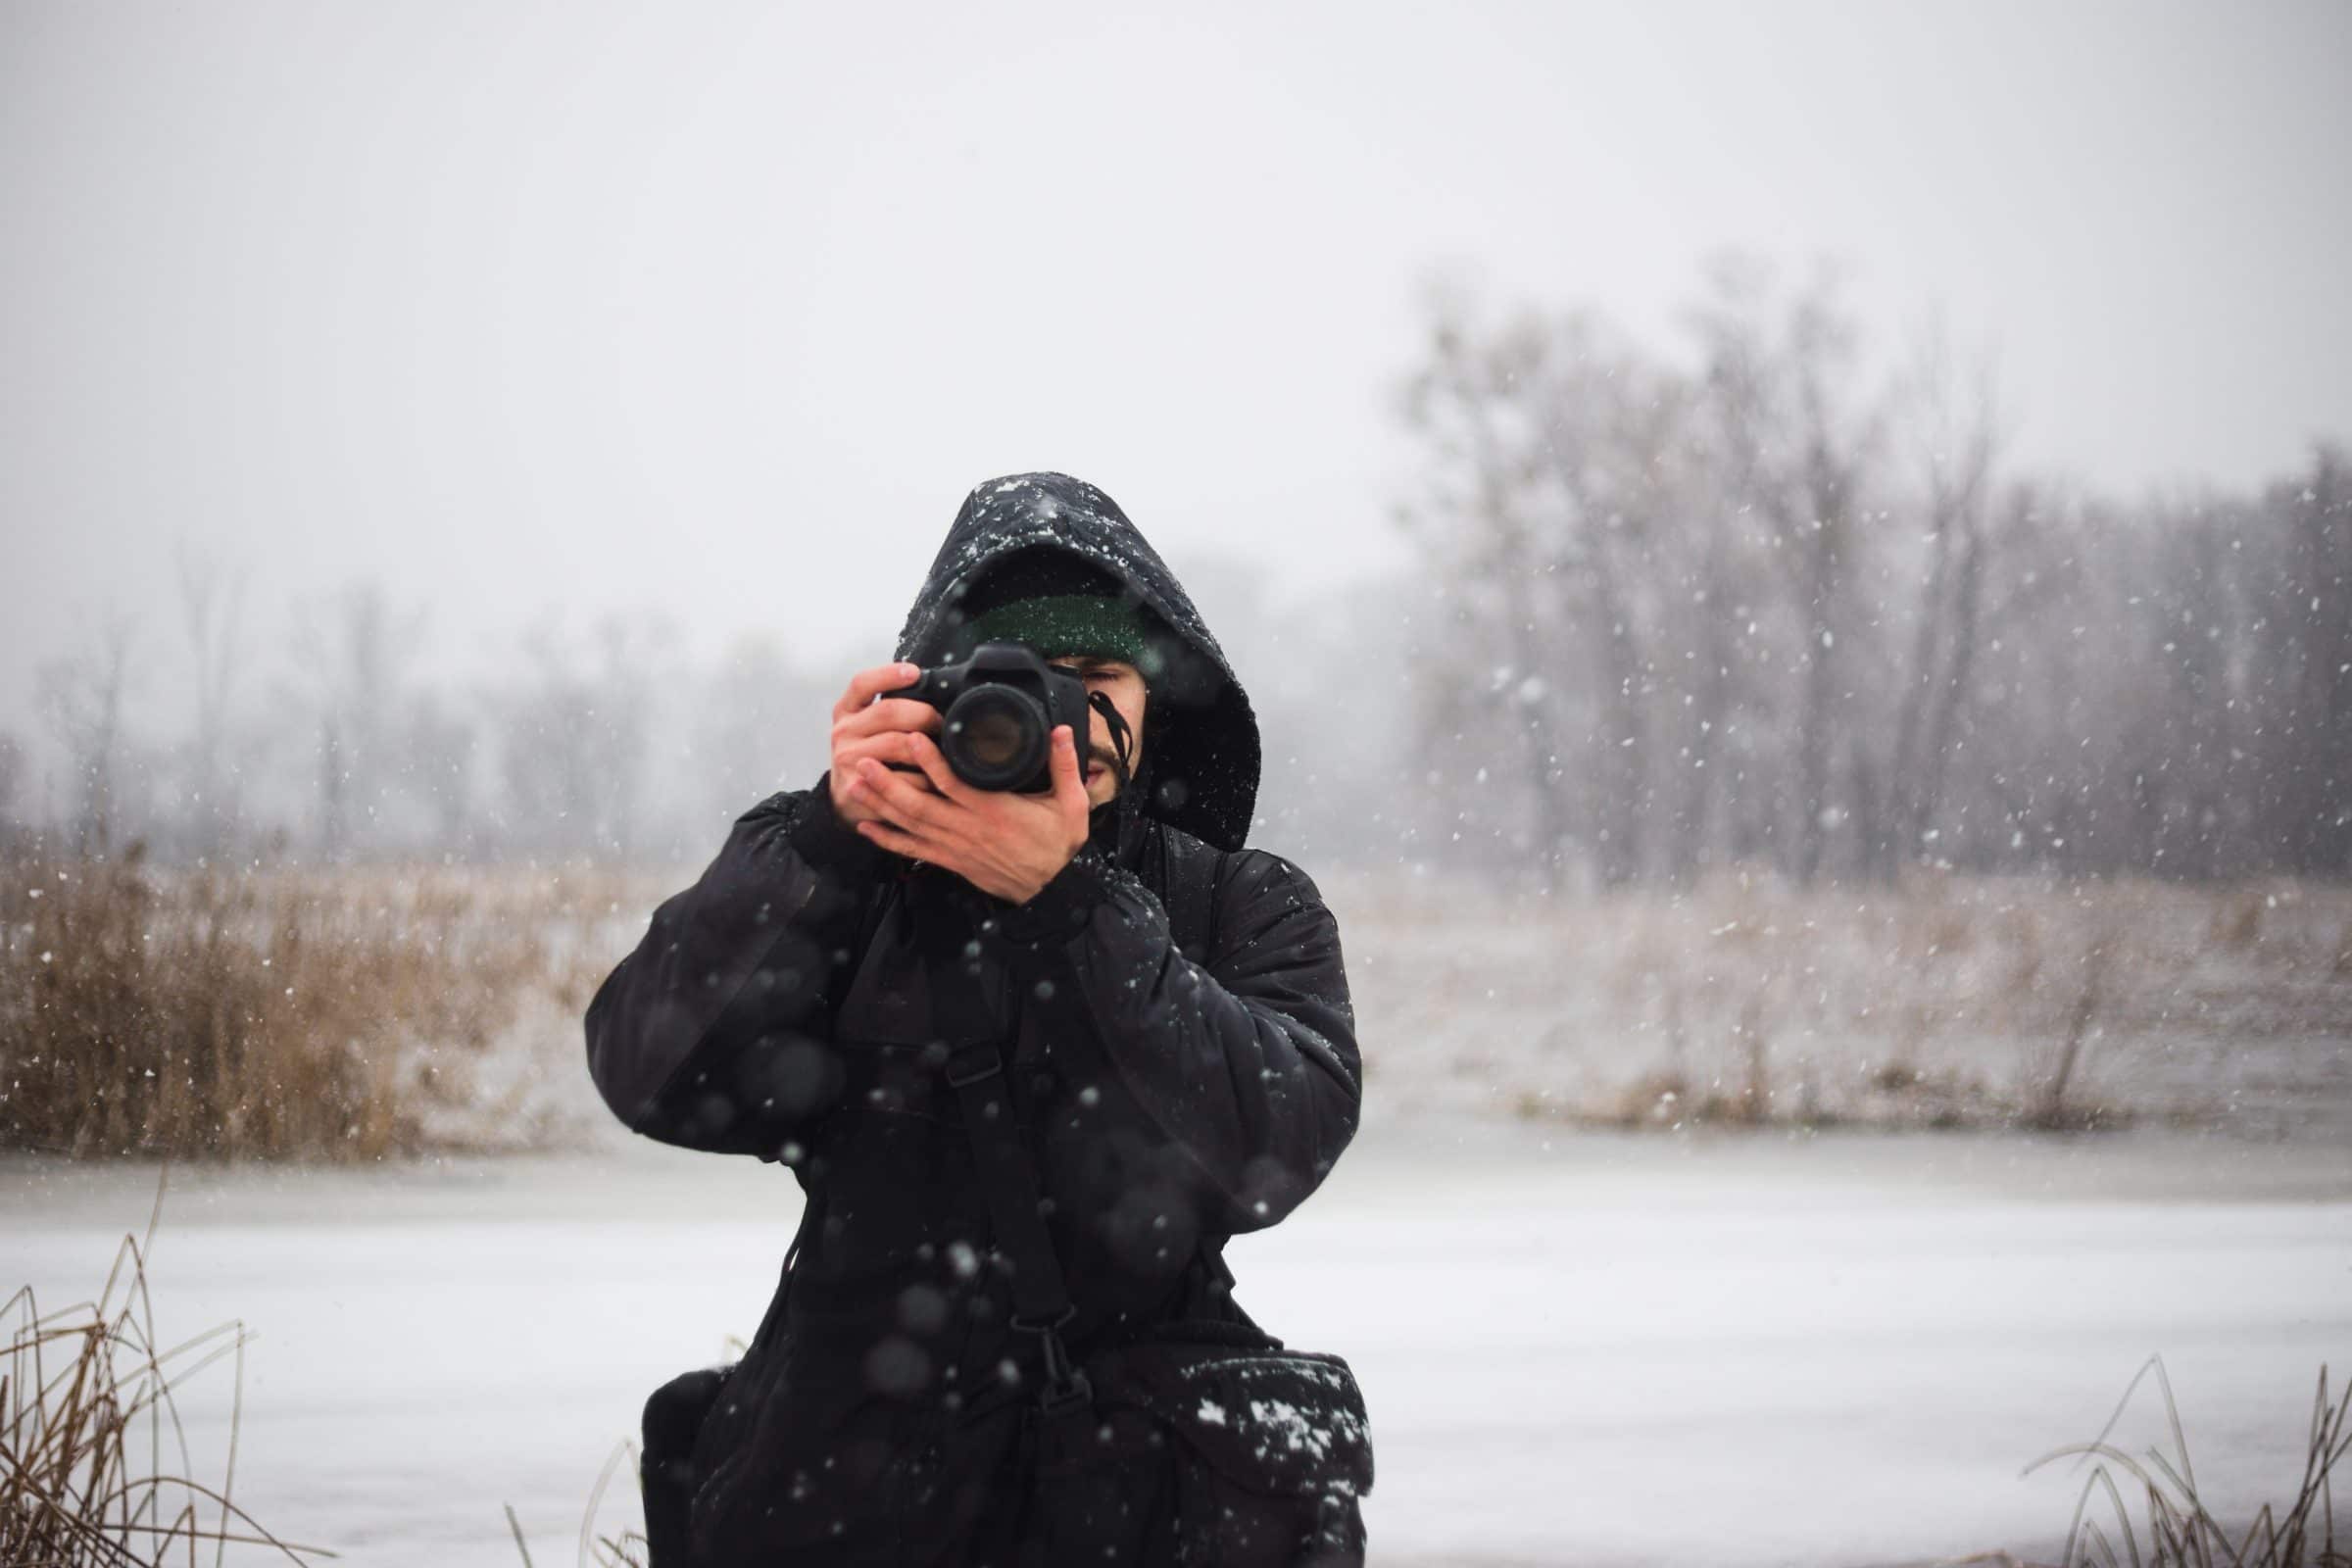 An adult stands in a winter field, the hood of their black winter jacket up. They hold a camera up to their eye and face the camera.